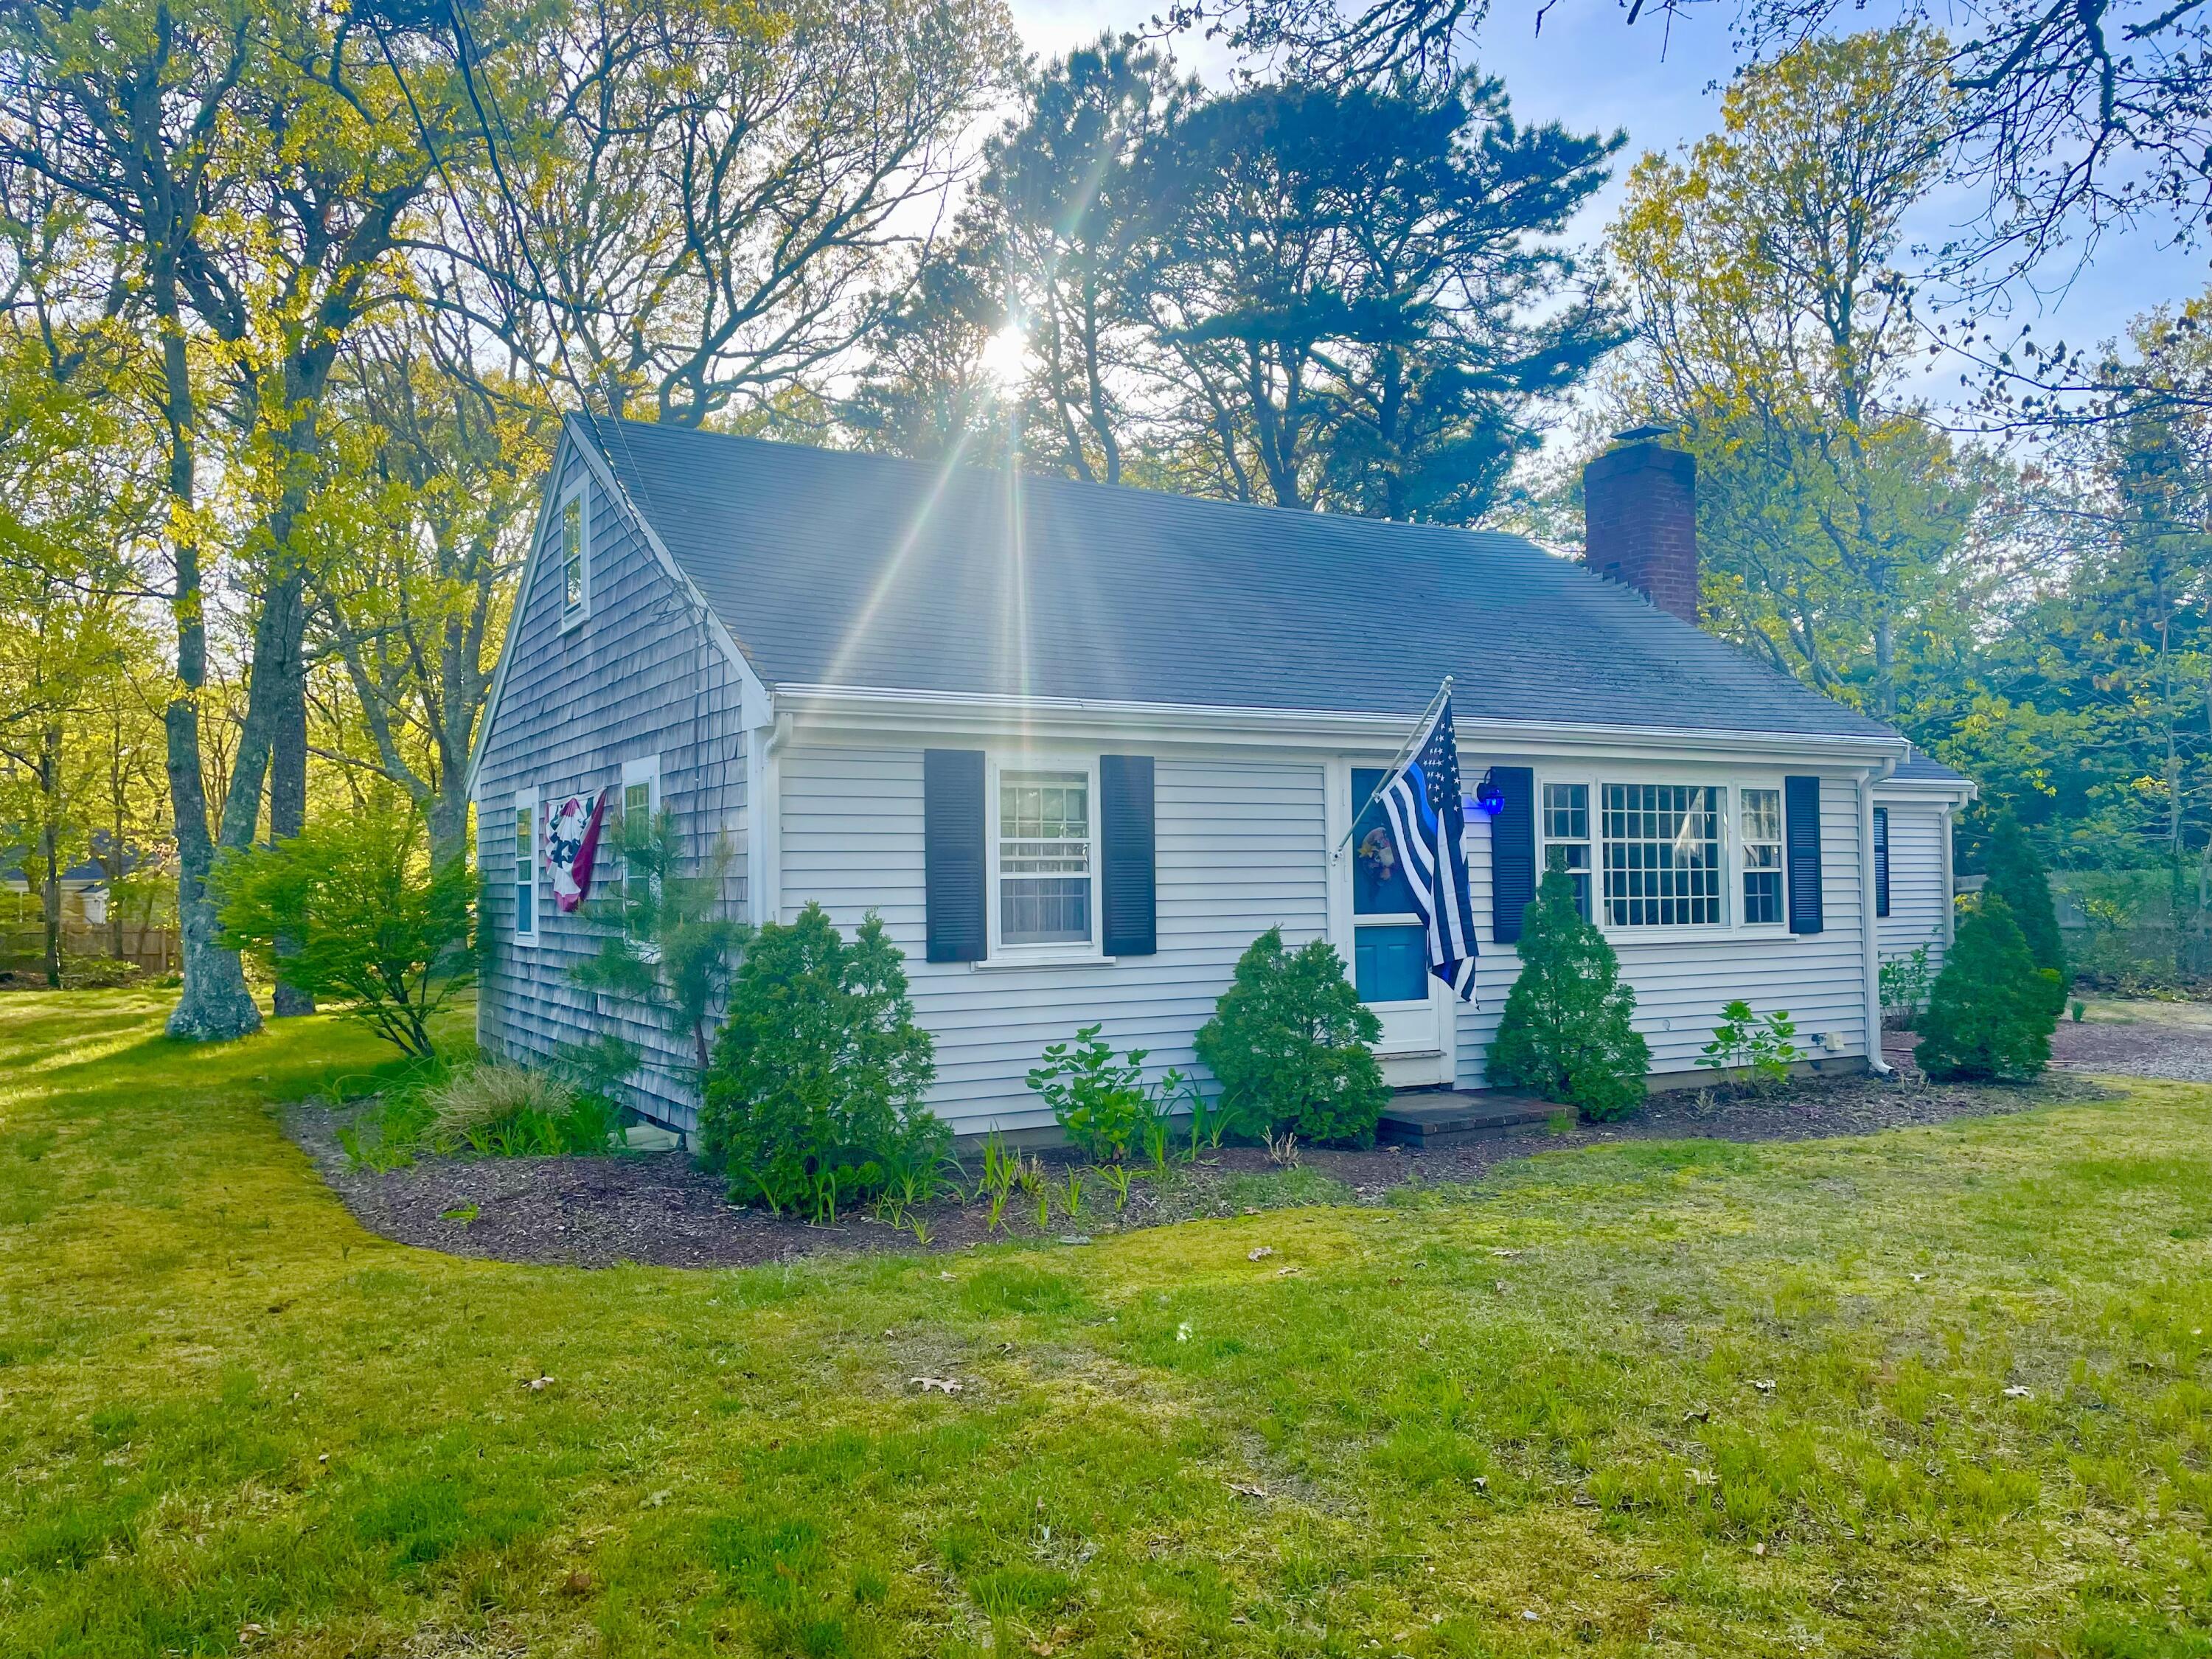 27 TERN Road, South Yarmouth, Massachusetts 02664, 3 Bedrooms Bedrooms, 5 Rooms Rooms,1 BathroomBathrooms,Residential,For Sale,27 TERN Road,22401975